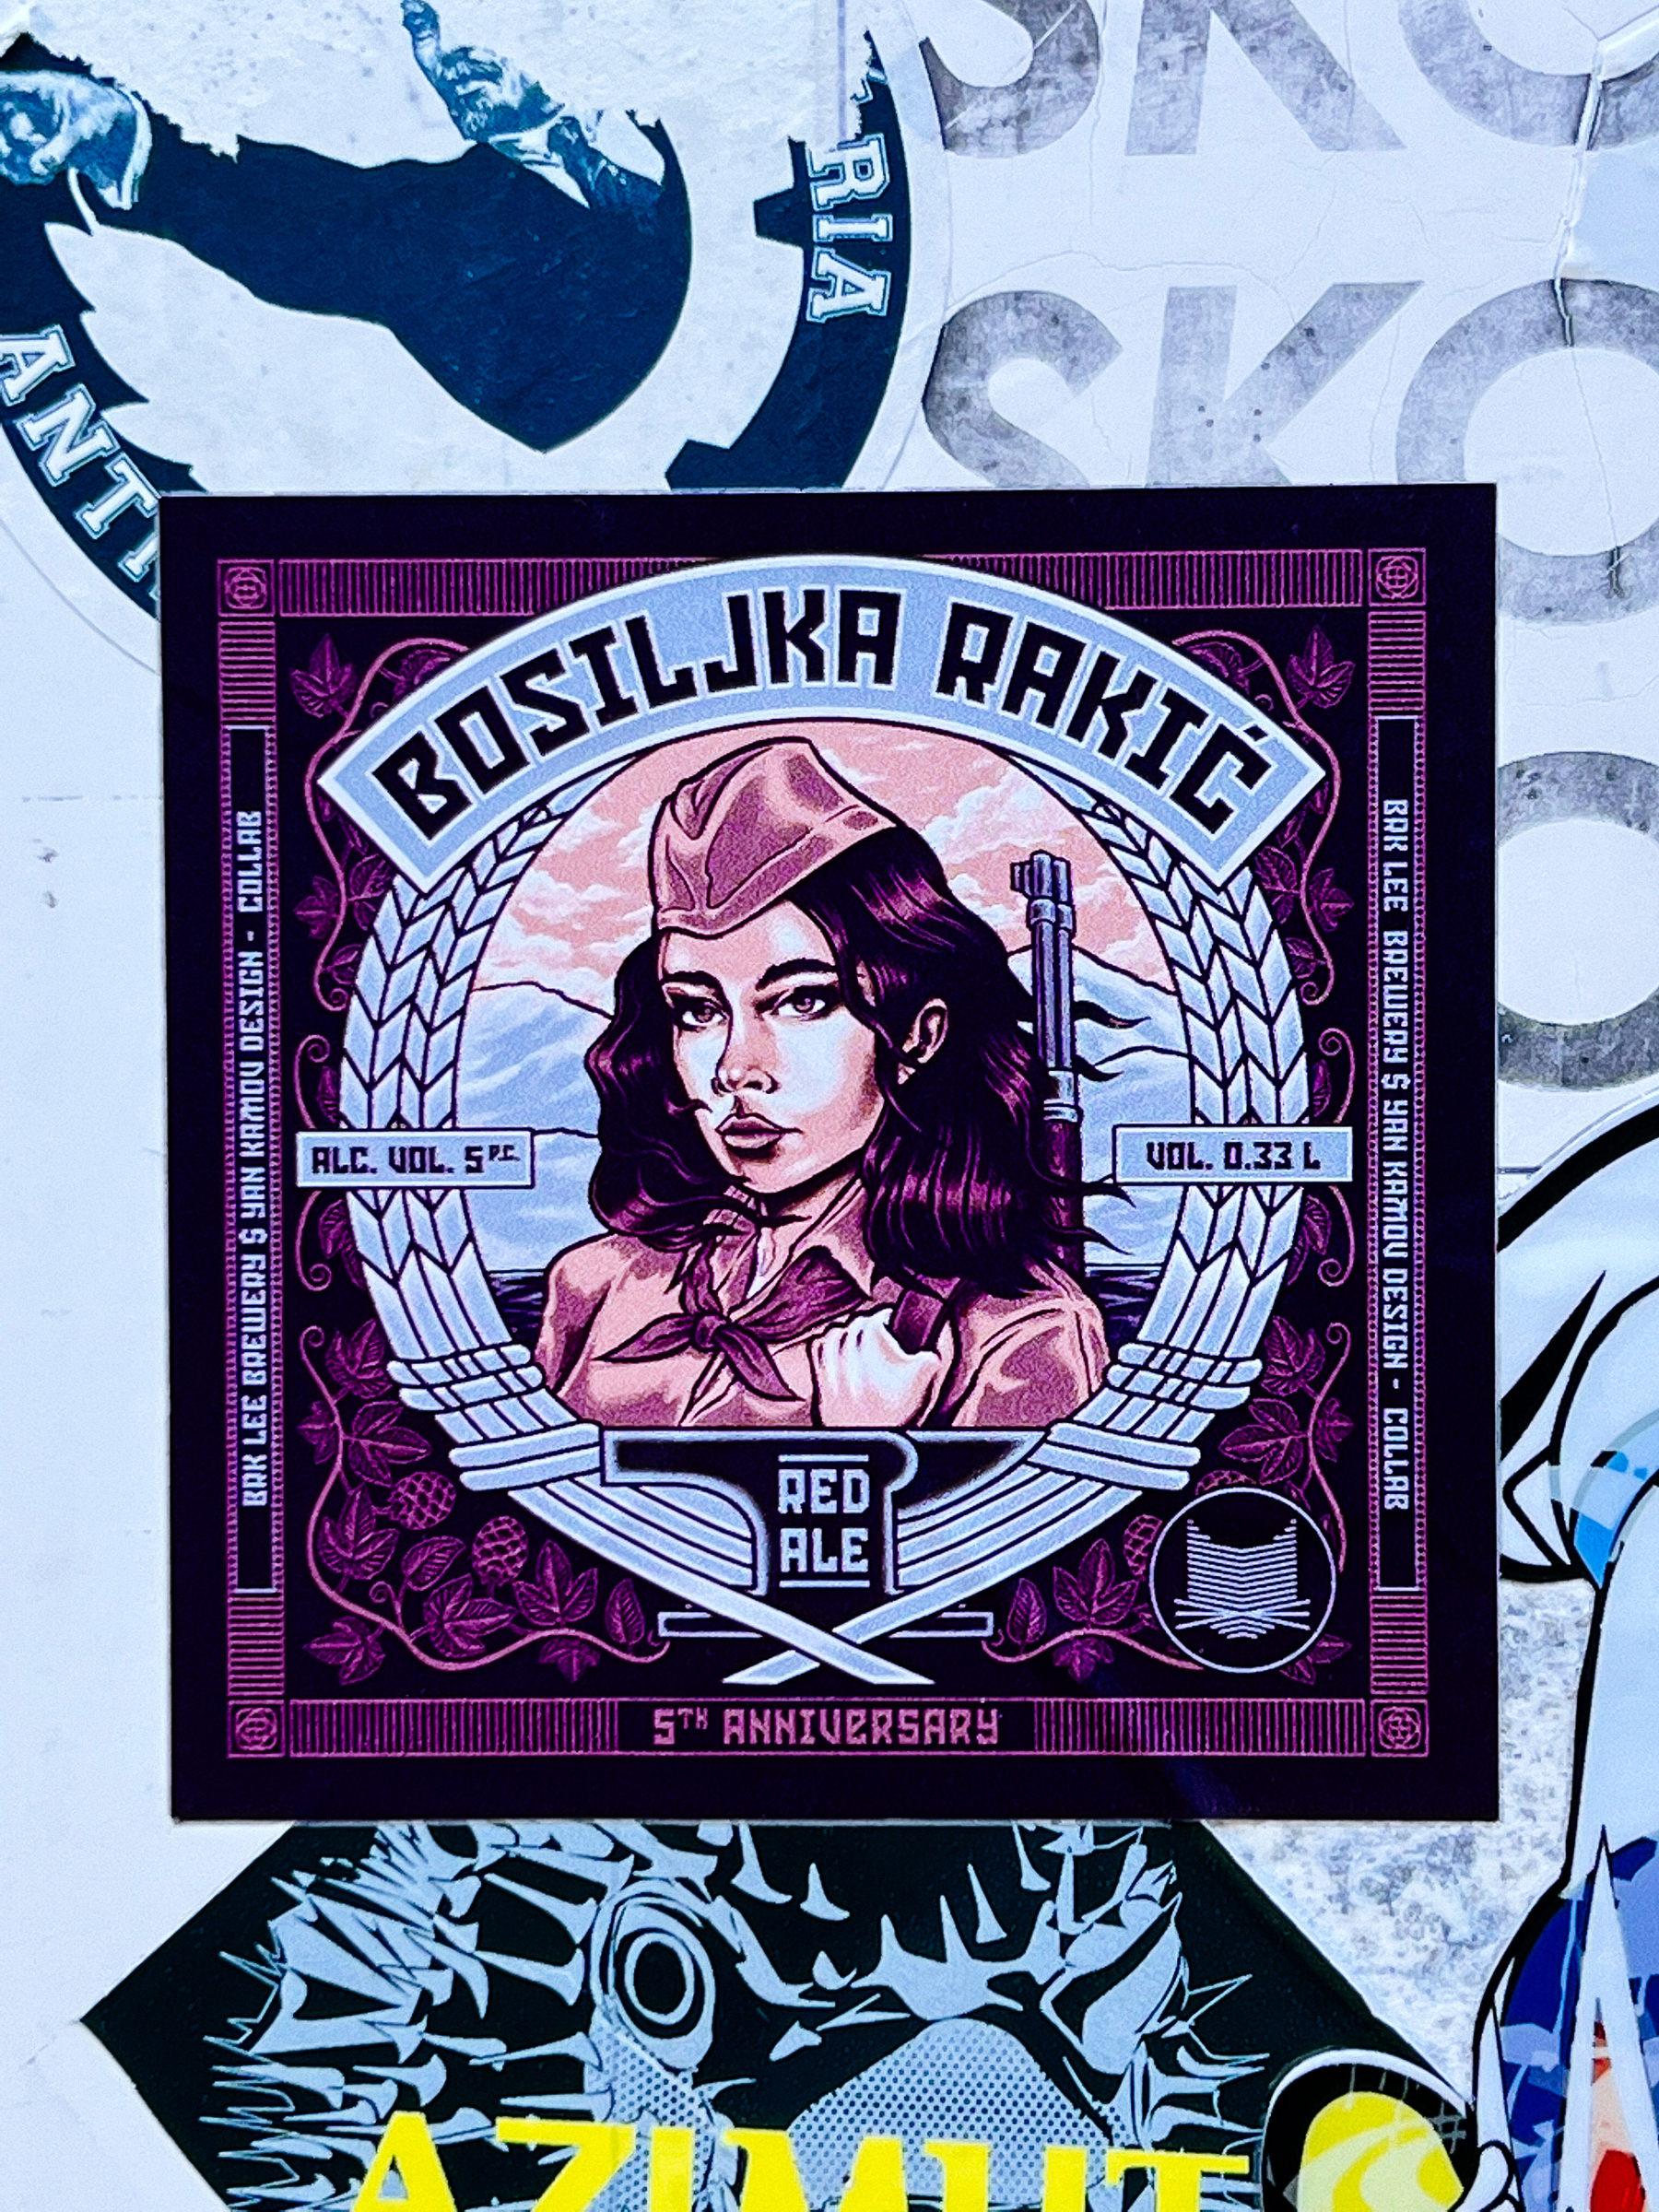 Sticker of a beer brand, with an illustration of what looks like a vintage Soviet (?) woman fighter, with a rifle hanging from her shoulder. 